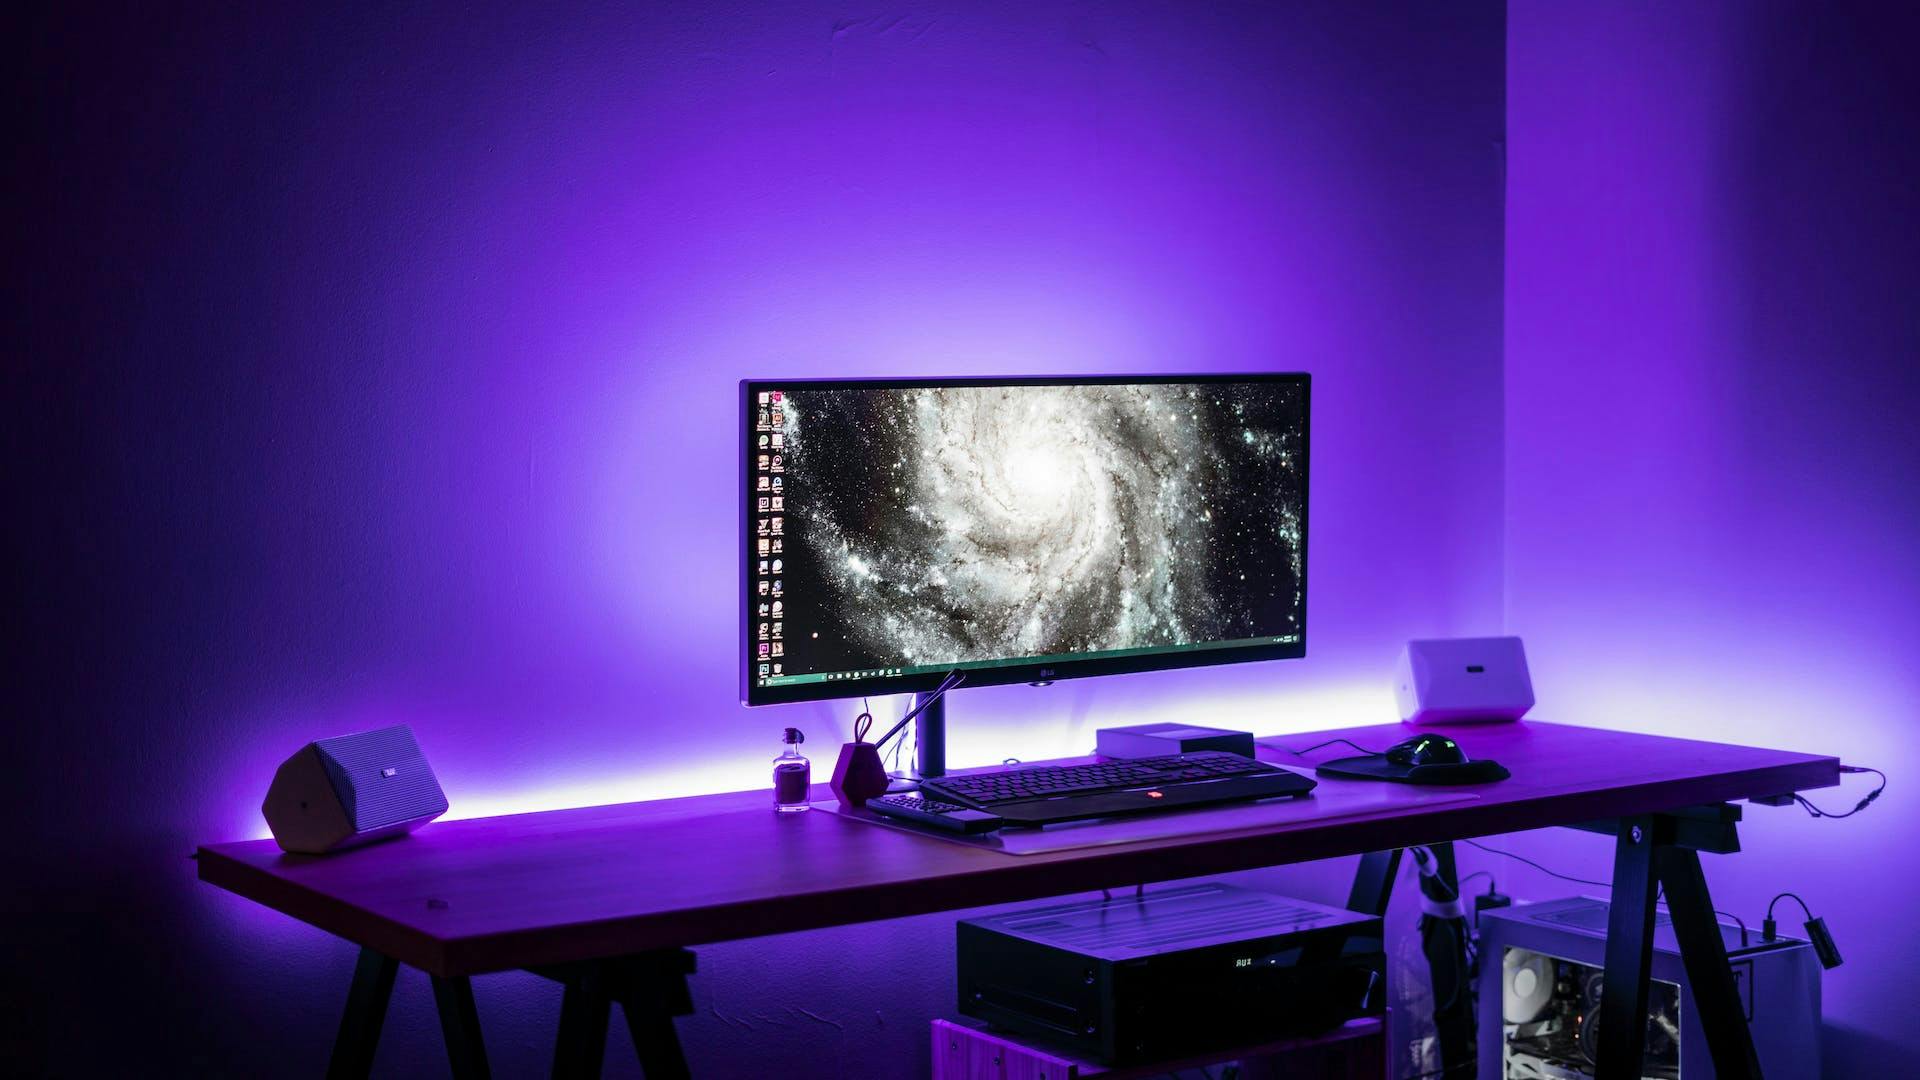 In a clean gaming setup with purple LED elements, a gaming monitor and a gaming keyboard are placed on a gaming table. 